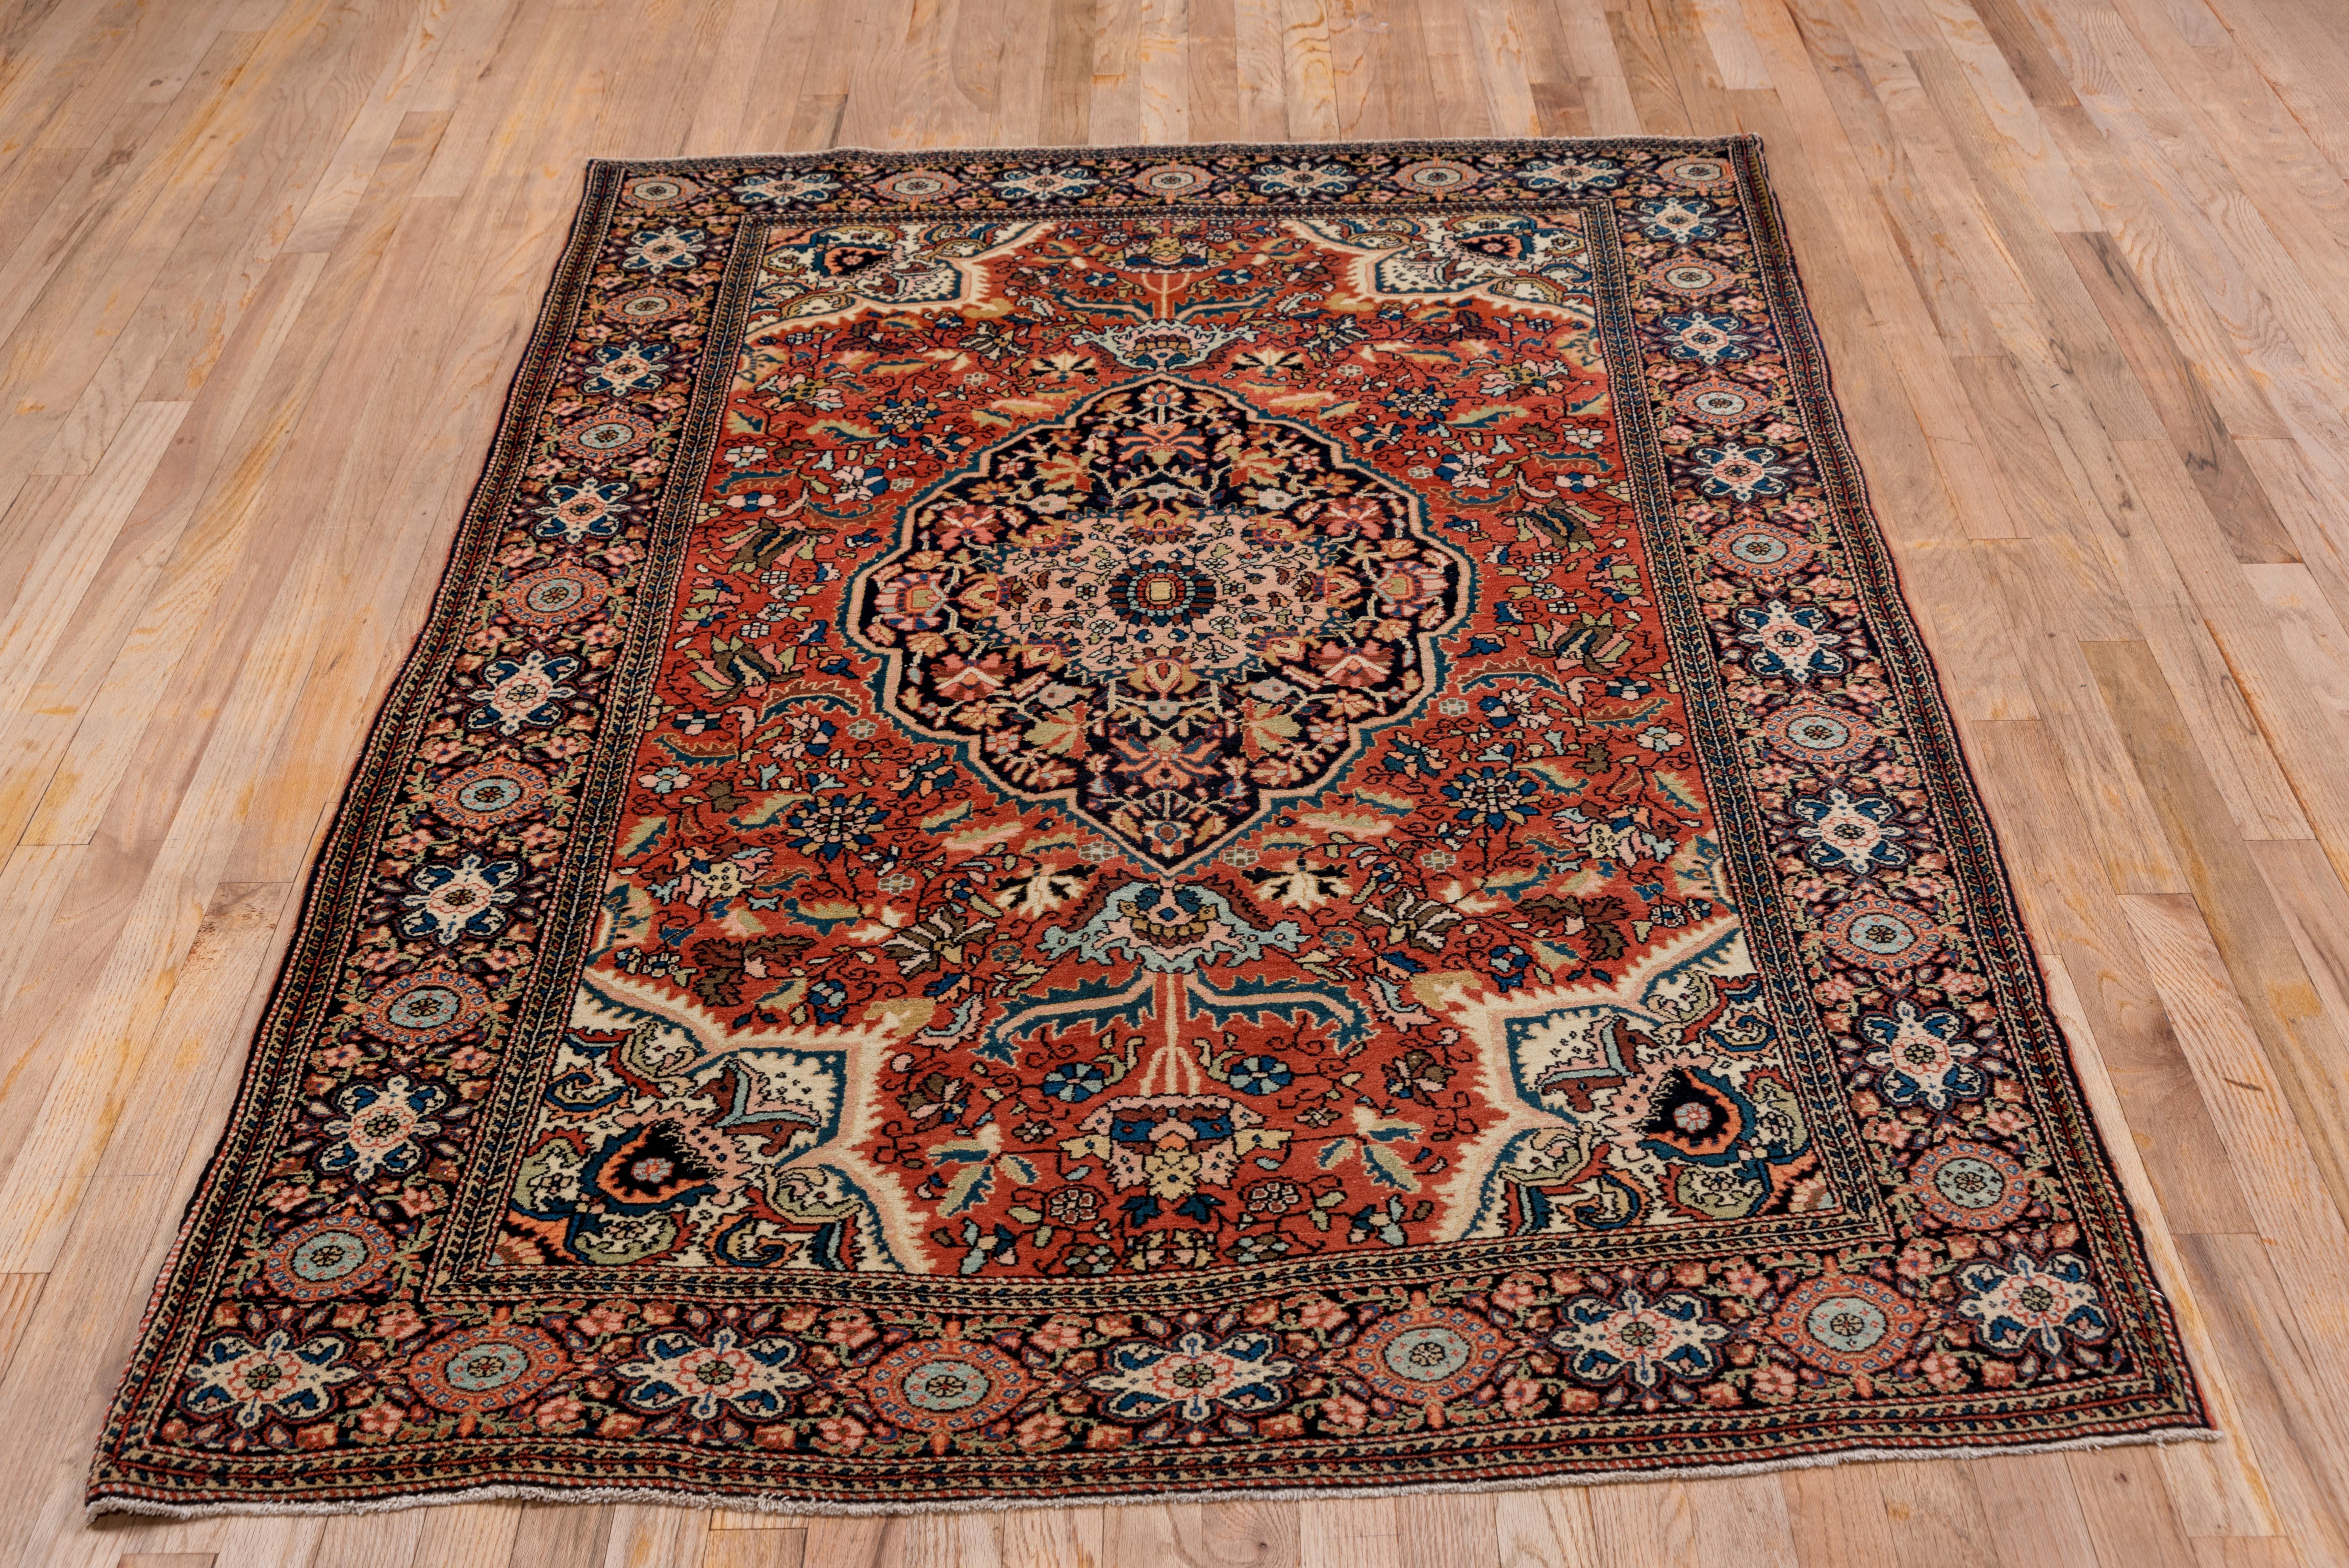 Far Sarouk Central Medallion in Bold Red with Ornate Persian Inspired Detailing For Sale 1